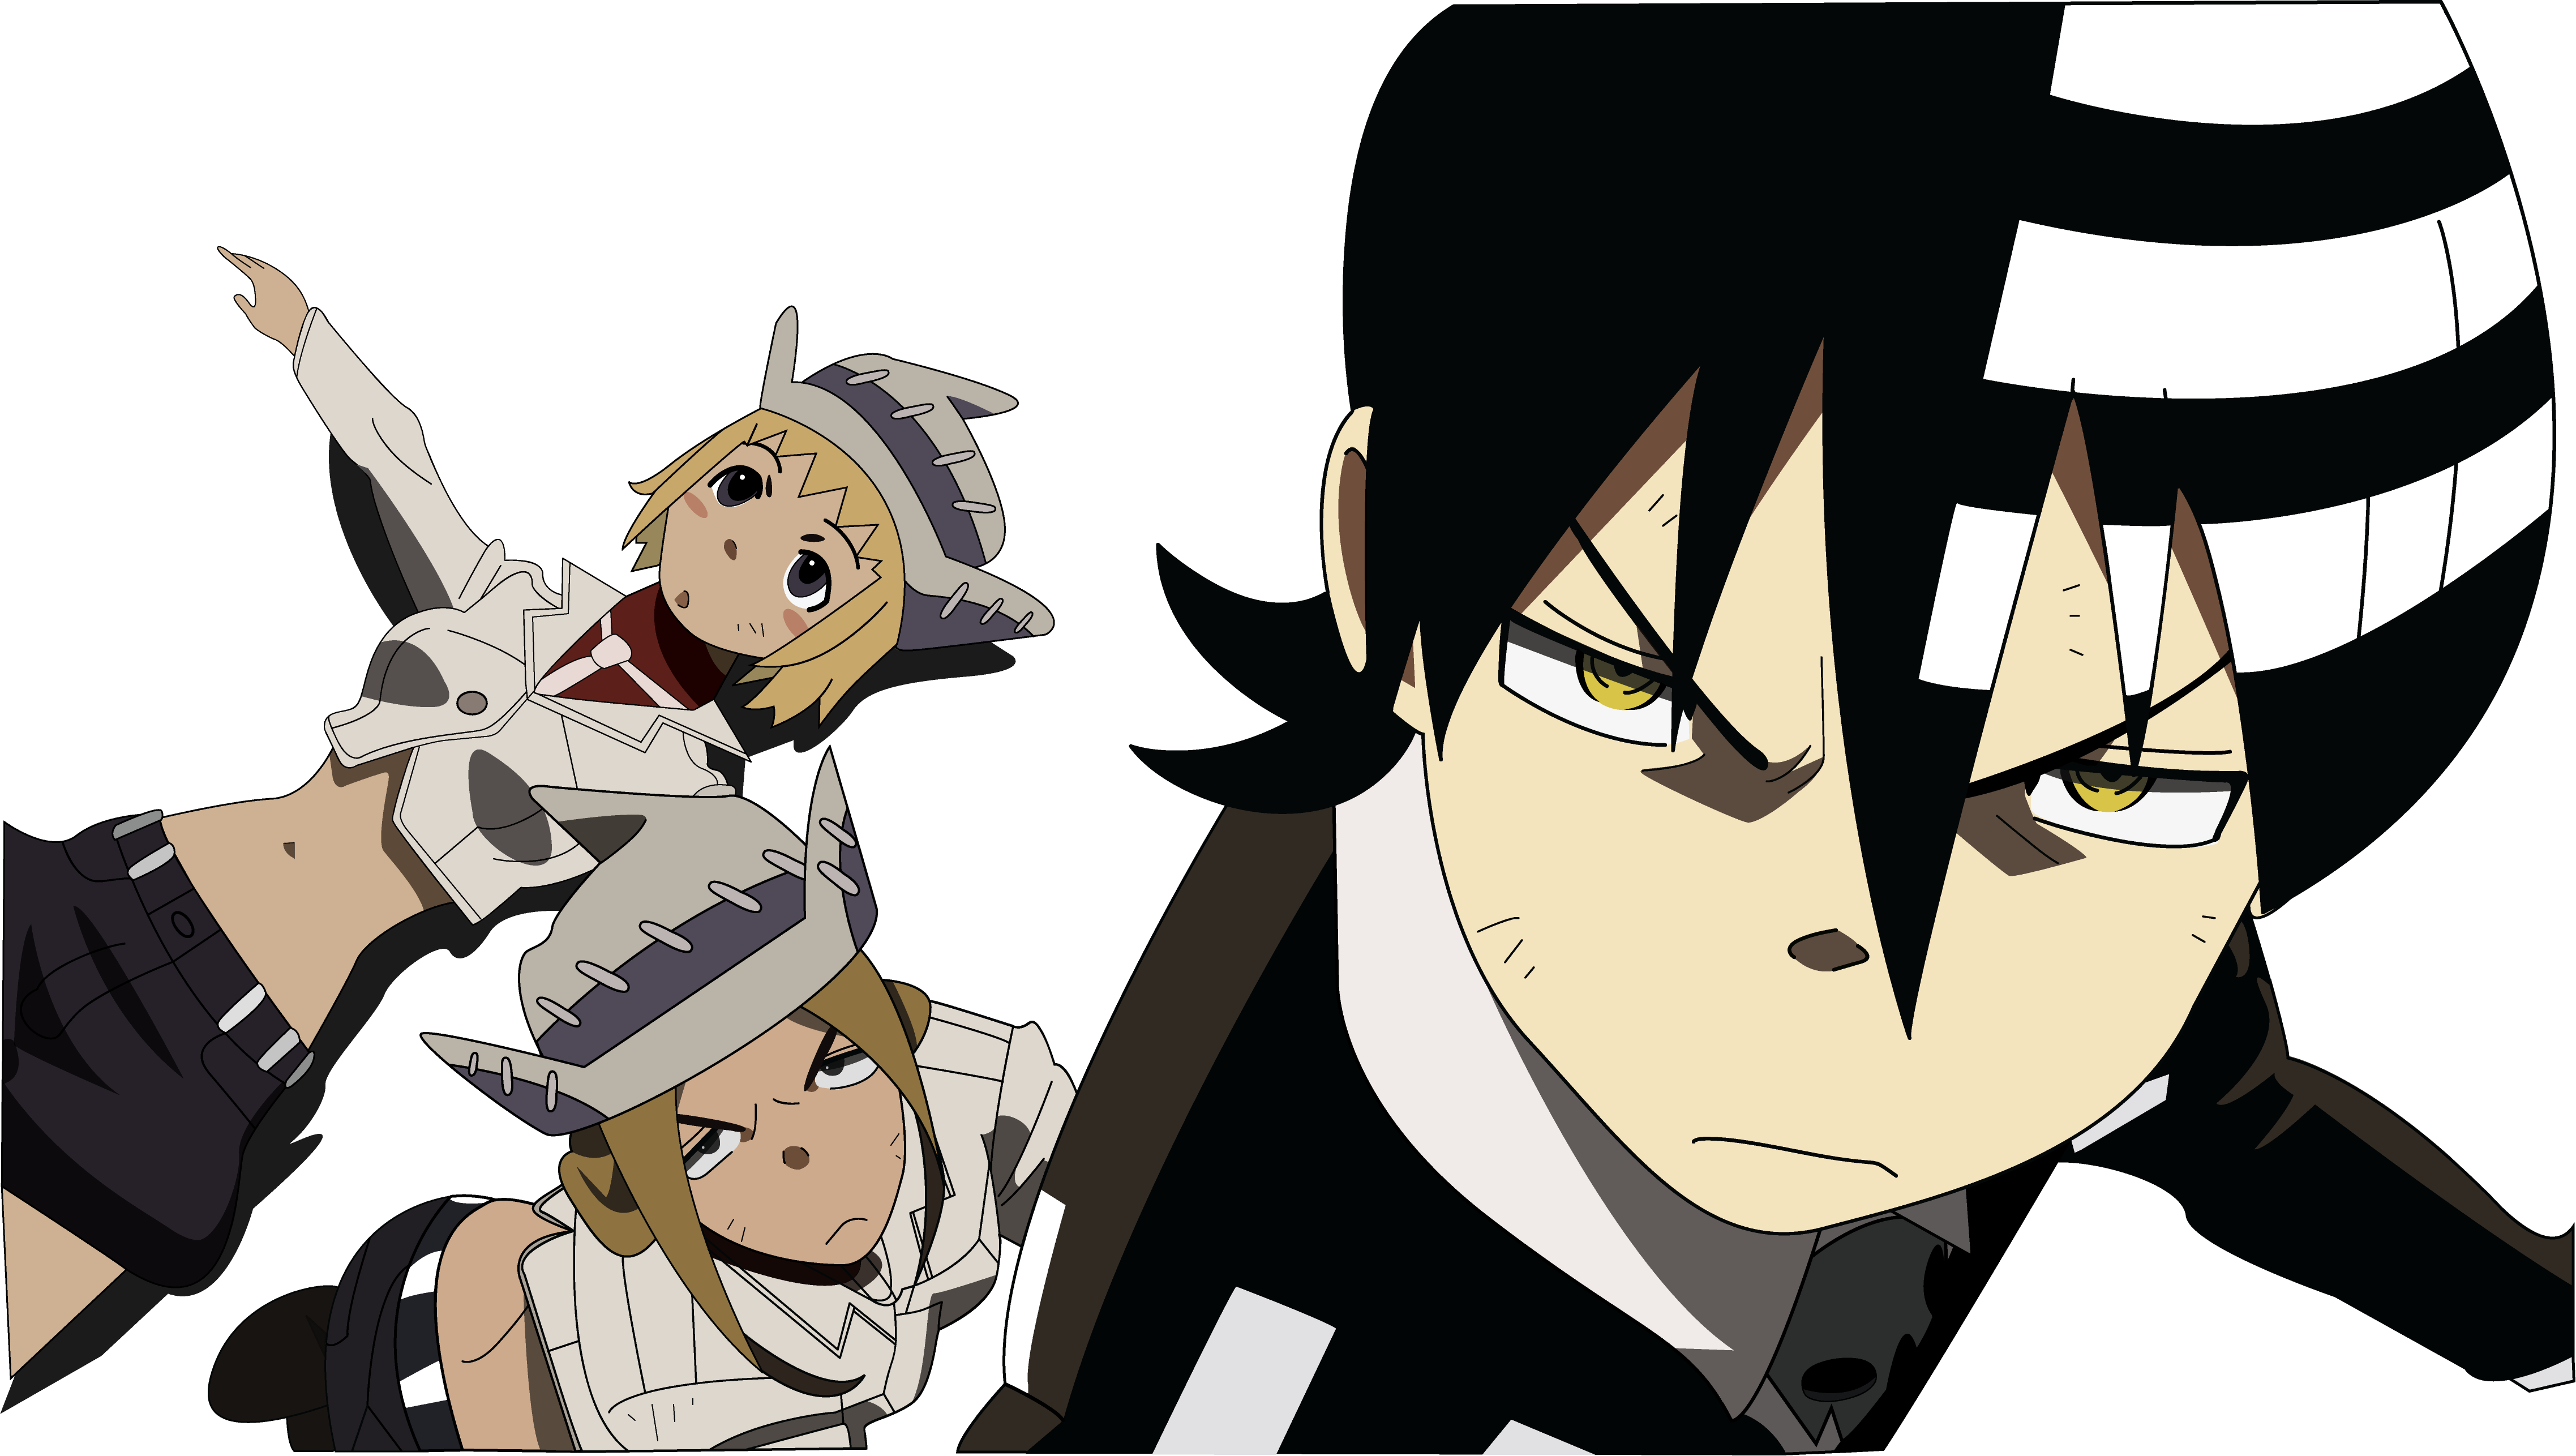 Soul Eater All Characters Wallpapers